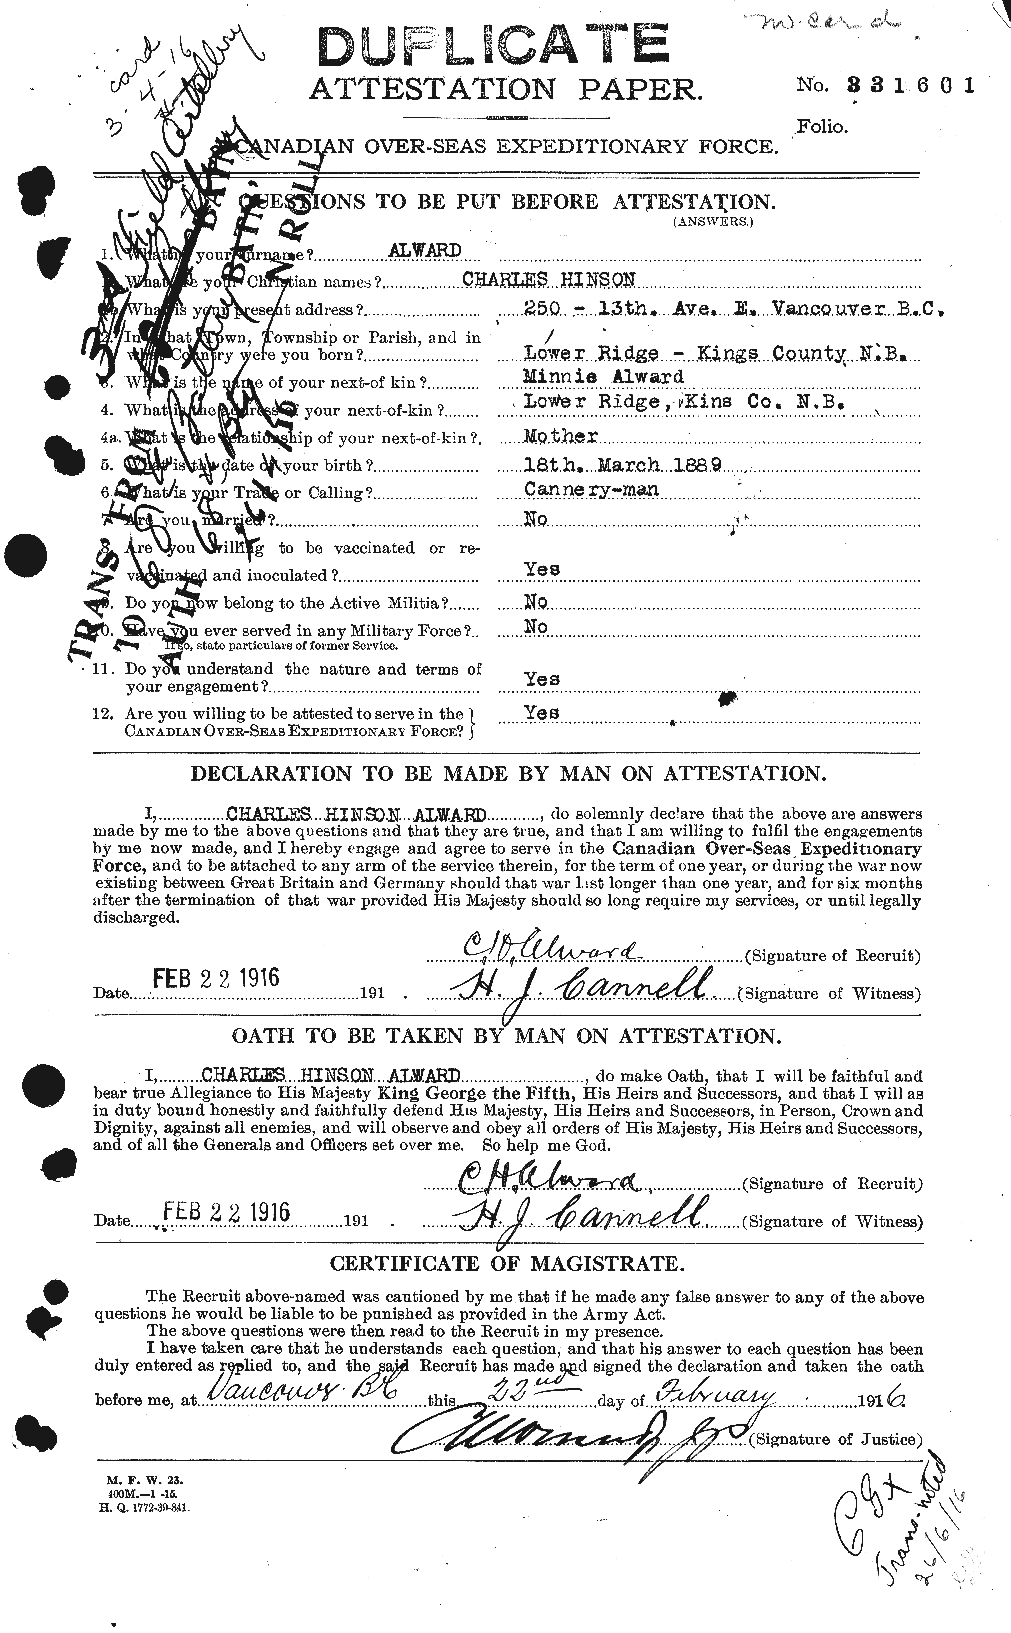 Personnel Records of the First World War - CEF 208055a